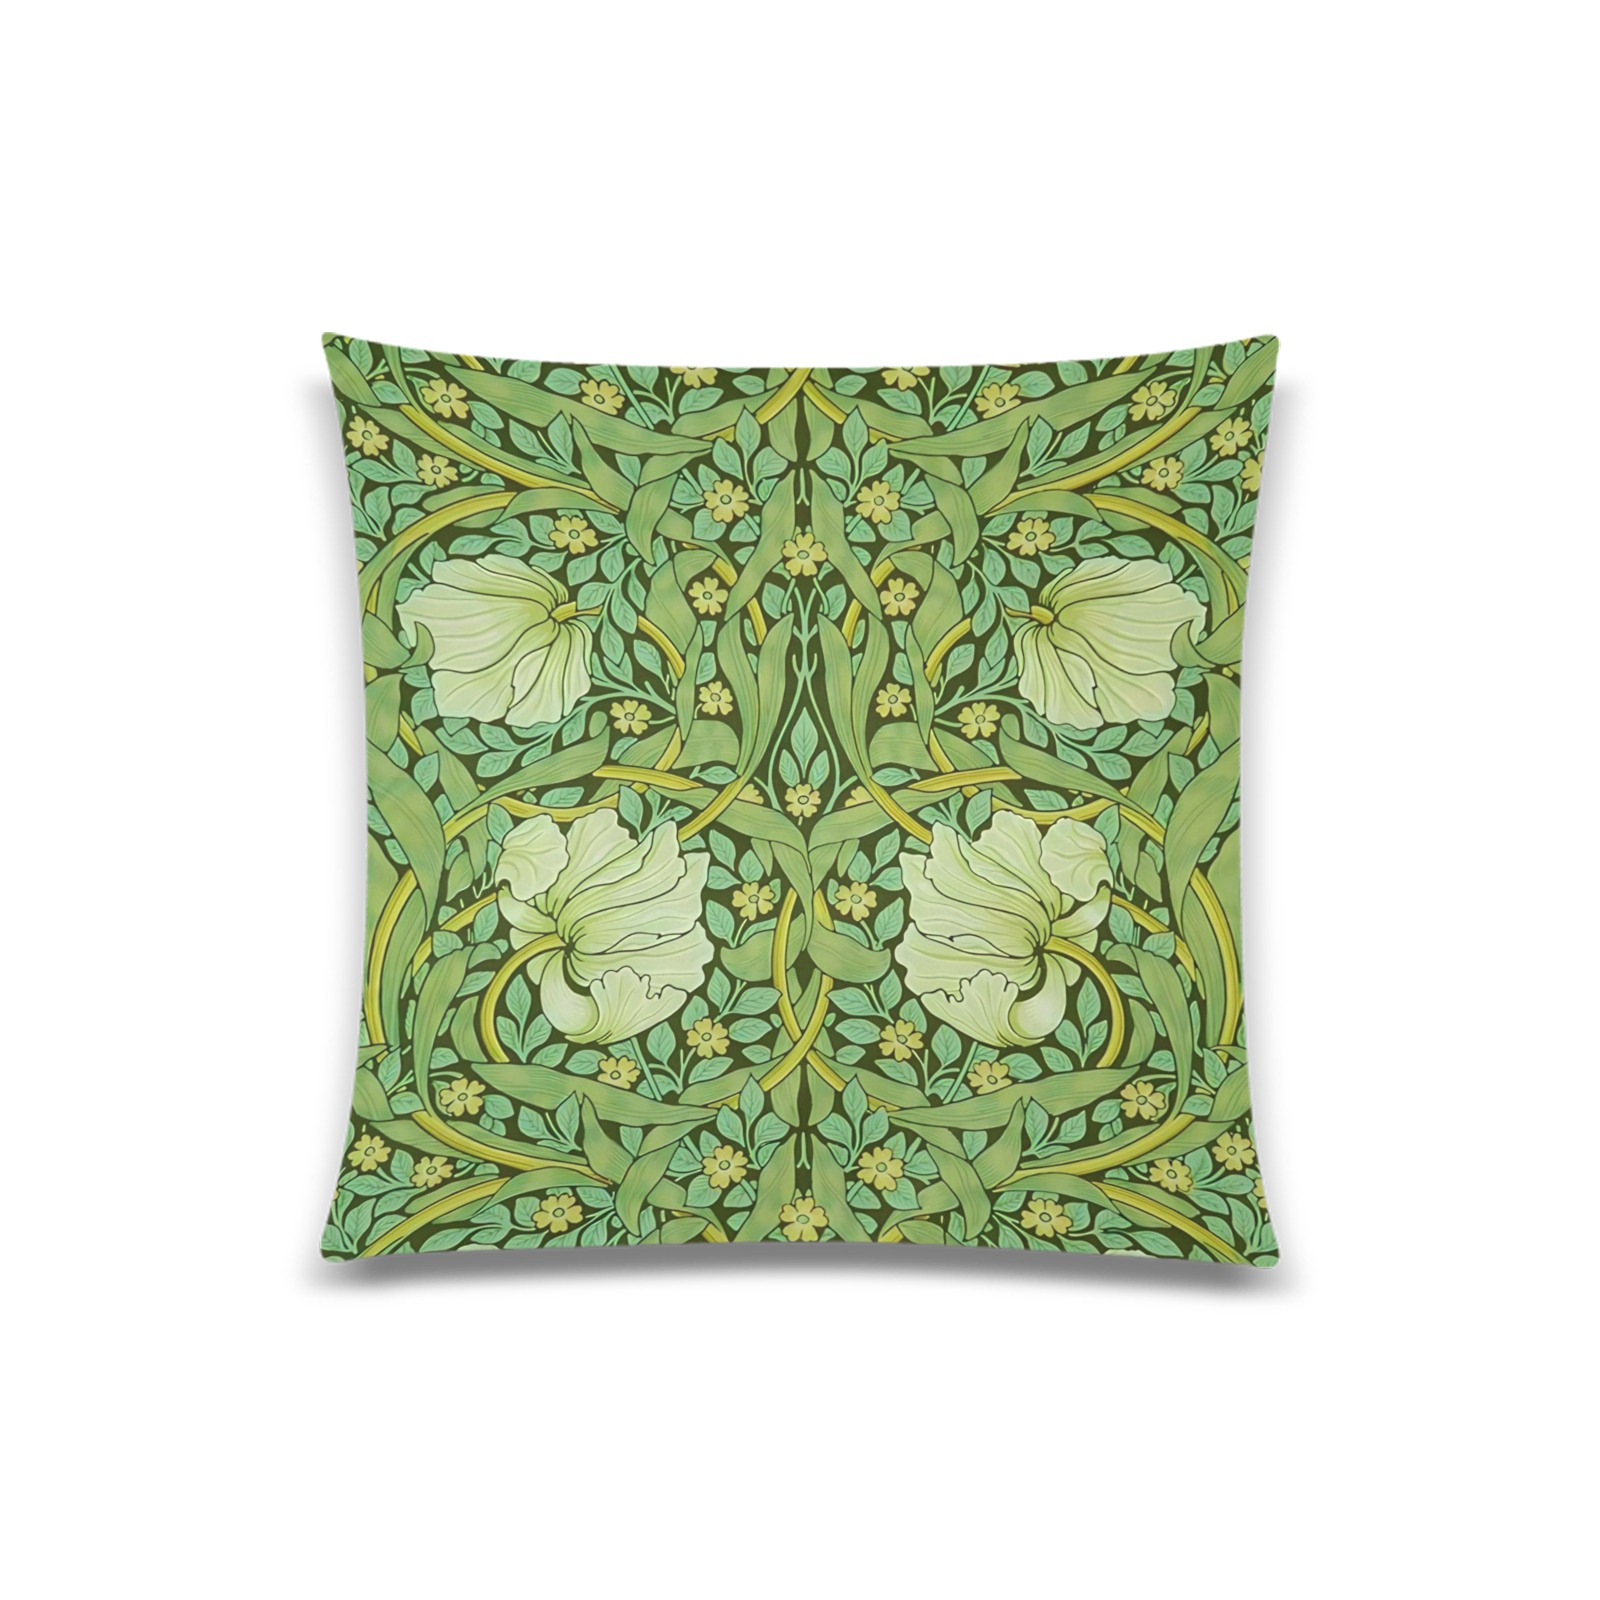 William Morris - Pimpernel Custom Zippered Pillow Case 20"x20"(Twin Sides)